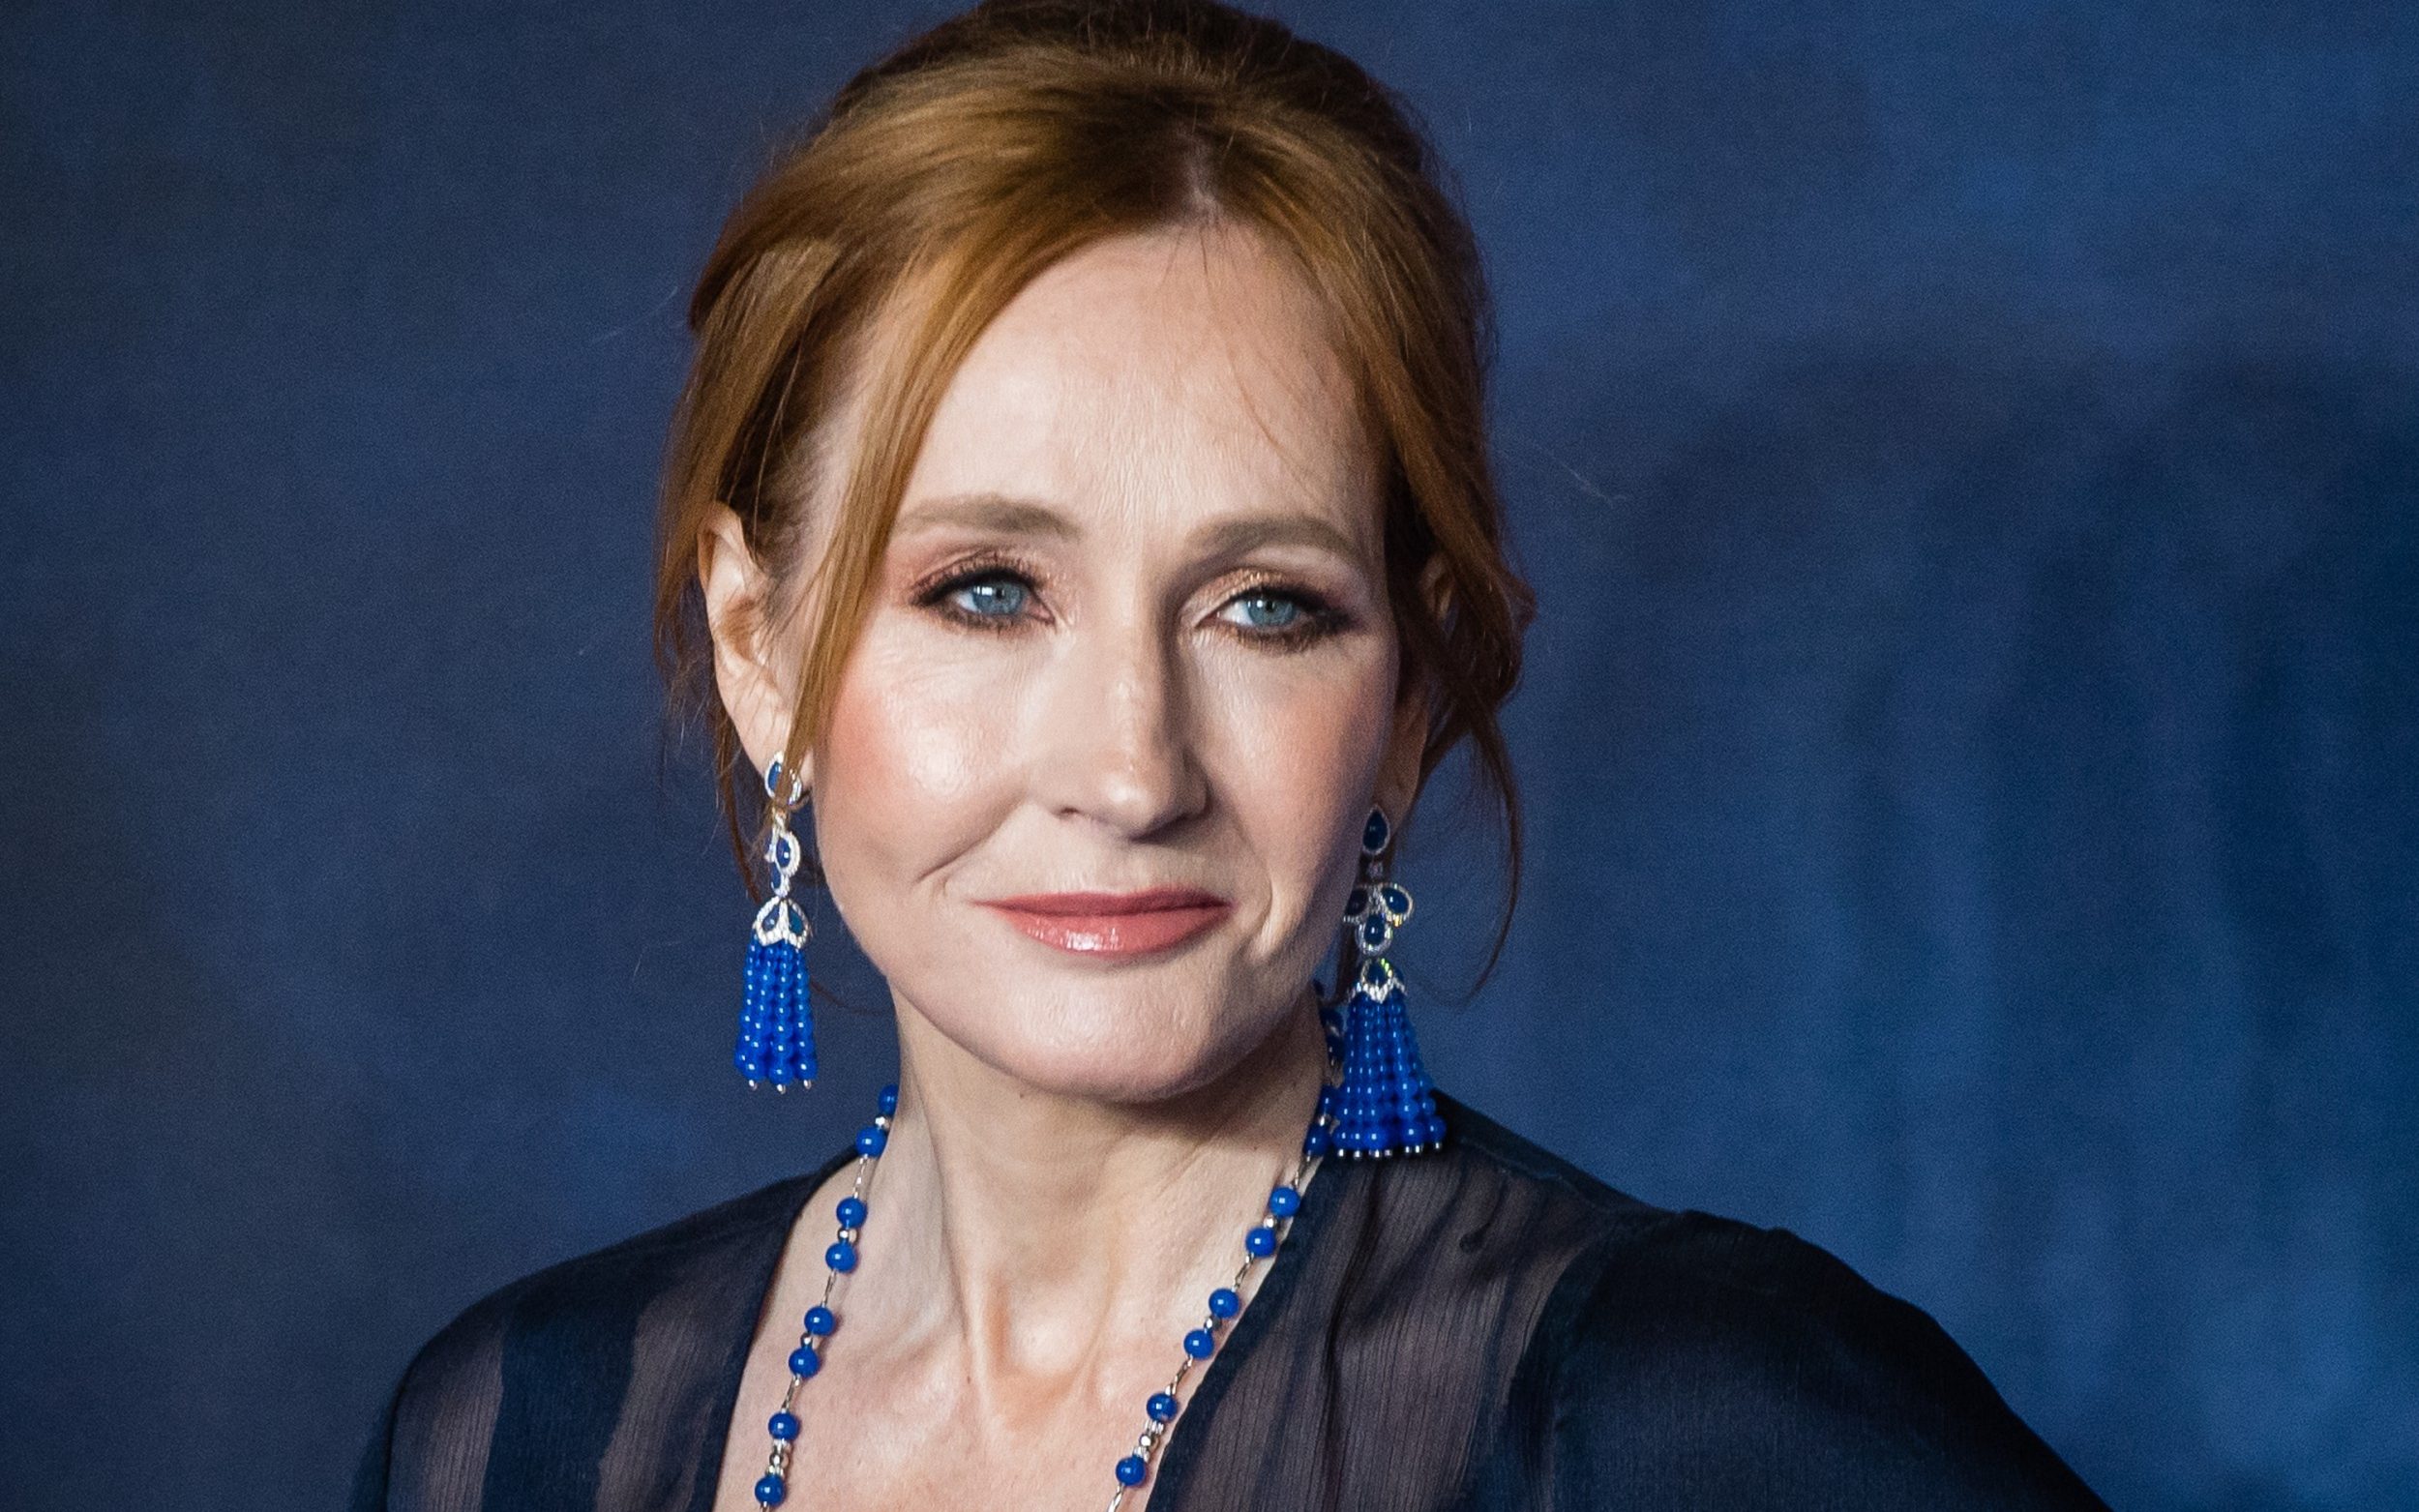 jk rowling’s personal data could have been compromised in british library cyber attack